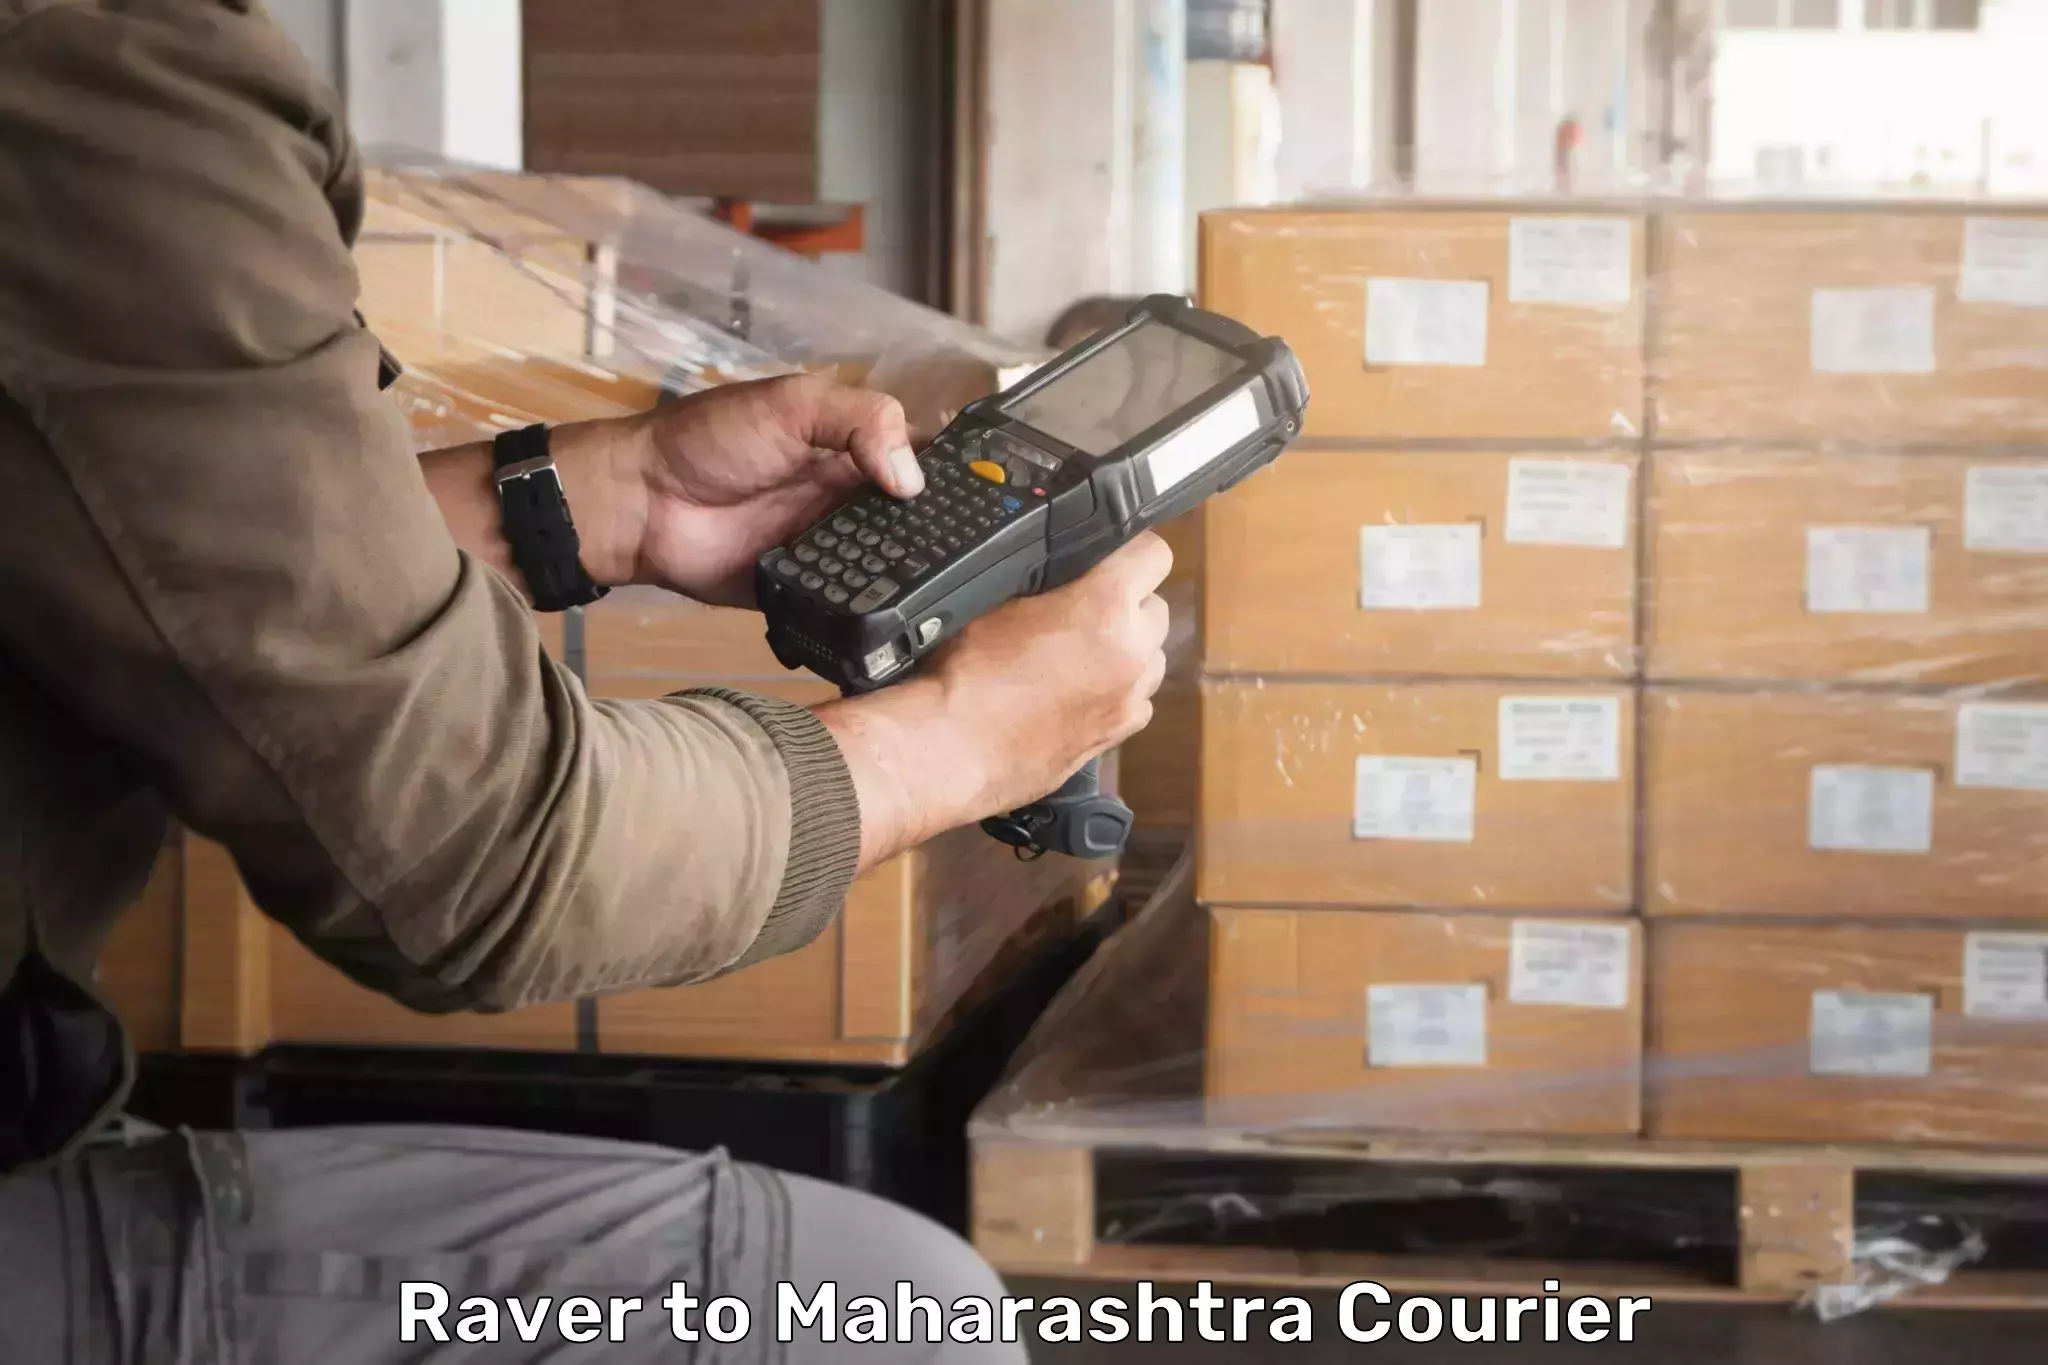 Weekend courier service Raver to Maharashtra